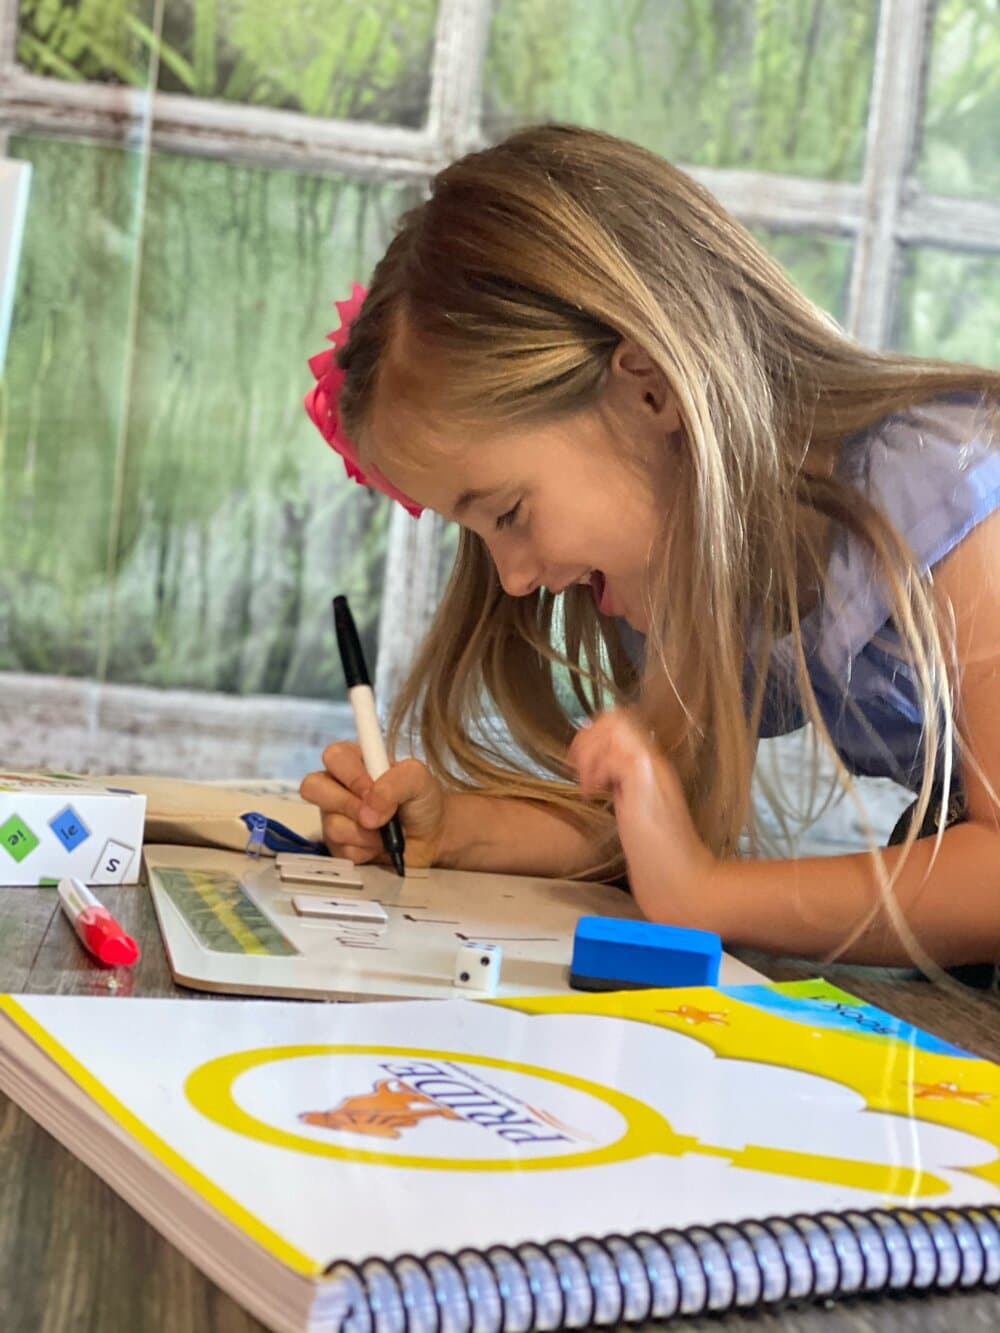 A smiling girl leans over a whiteboard to write with the PRIDE Reading Program Yellow Workbook in the foreground